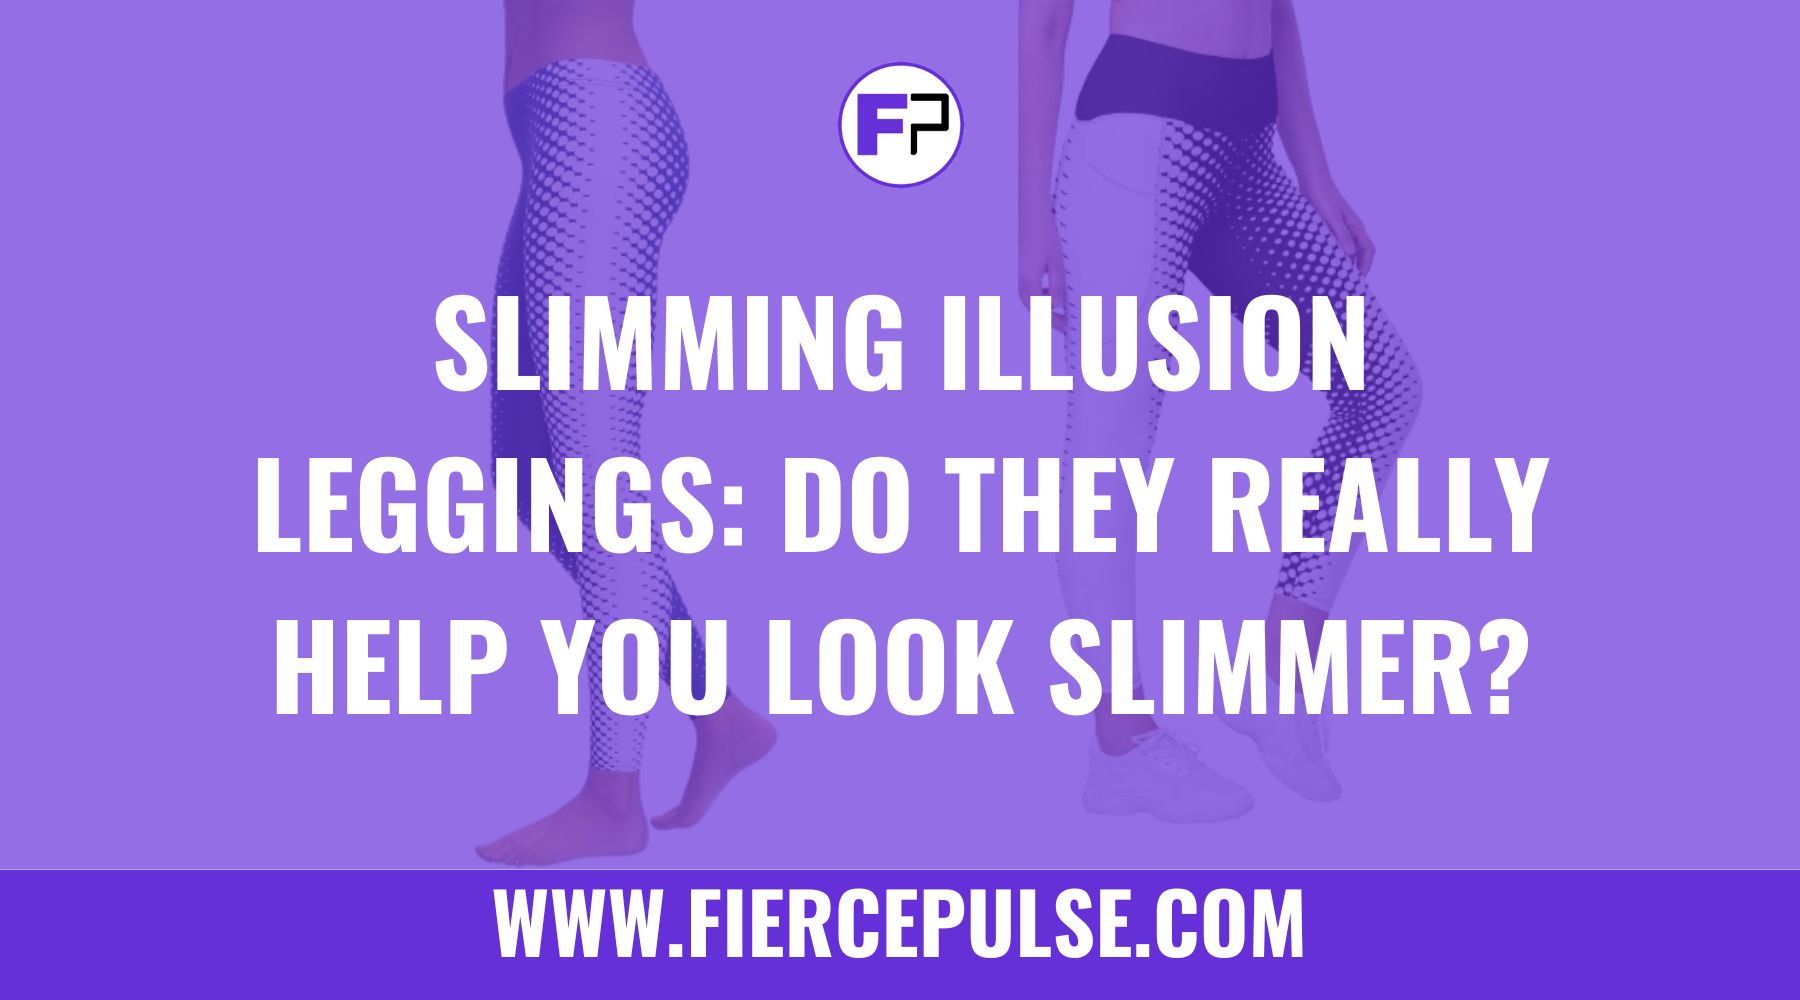 Slimming Illusion Leggings: Do They Really Help You Look Slimmer?